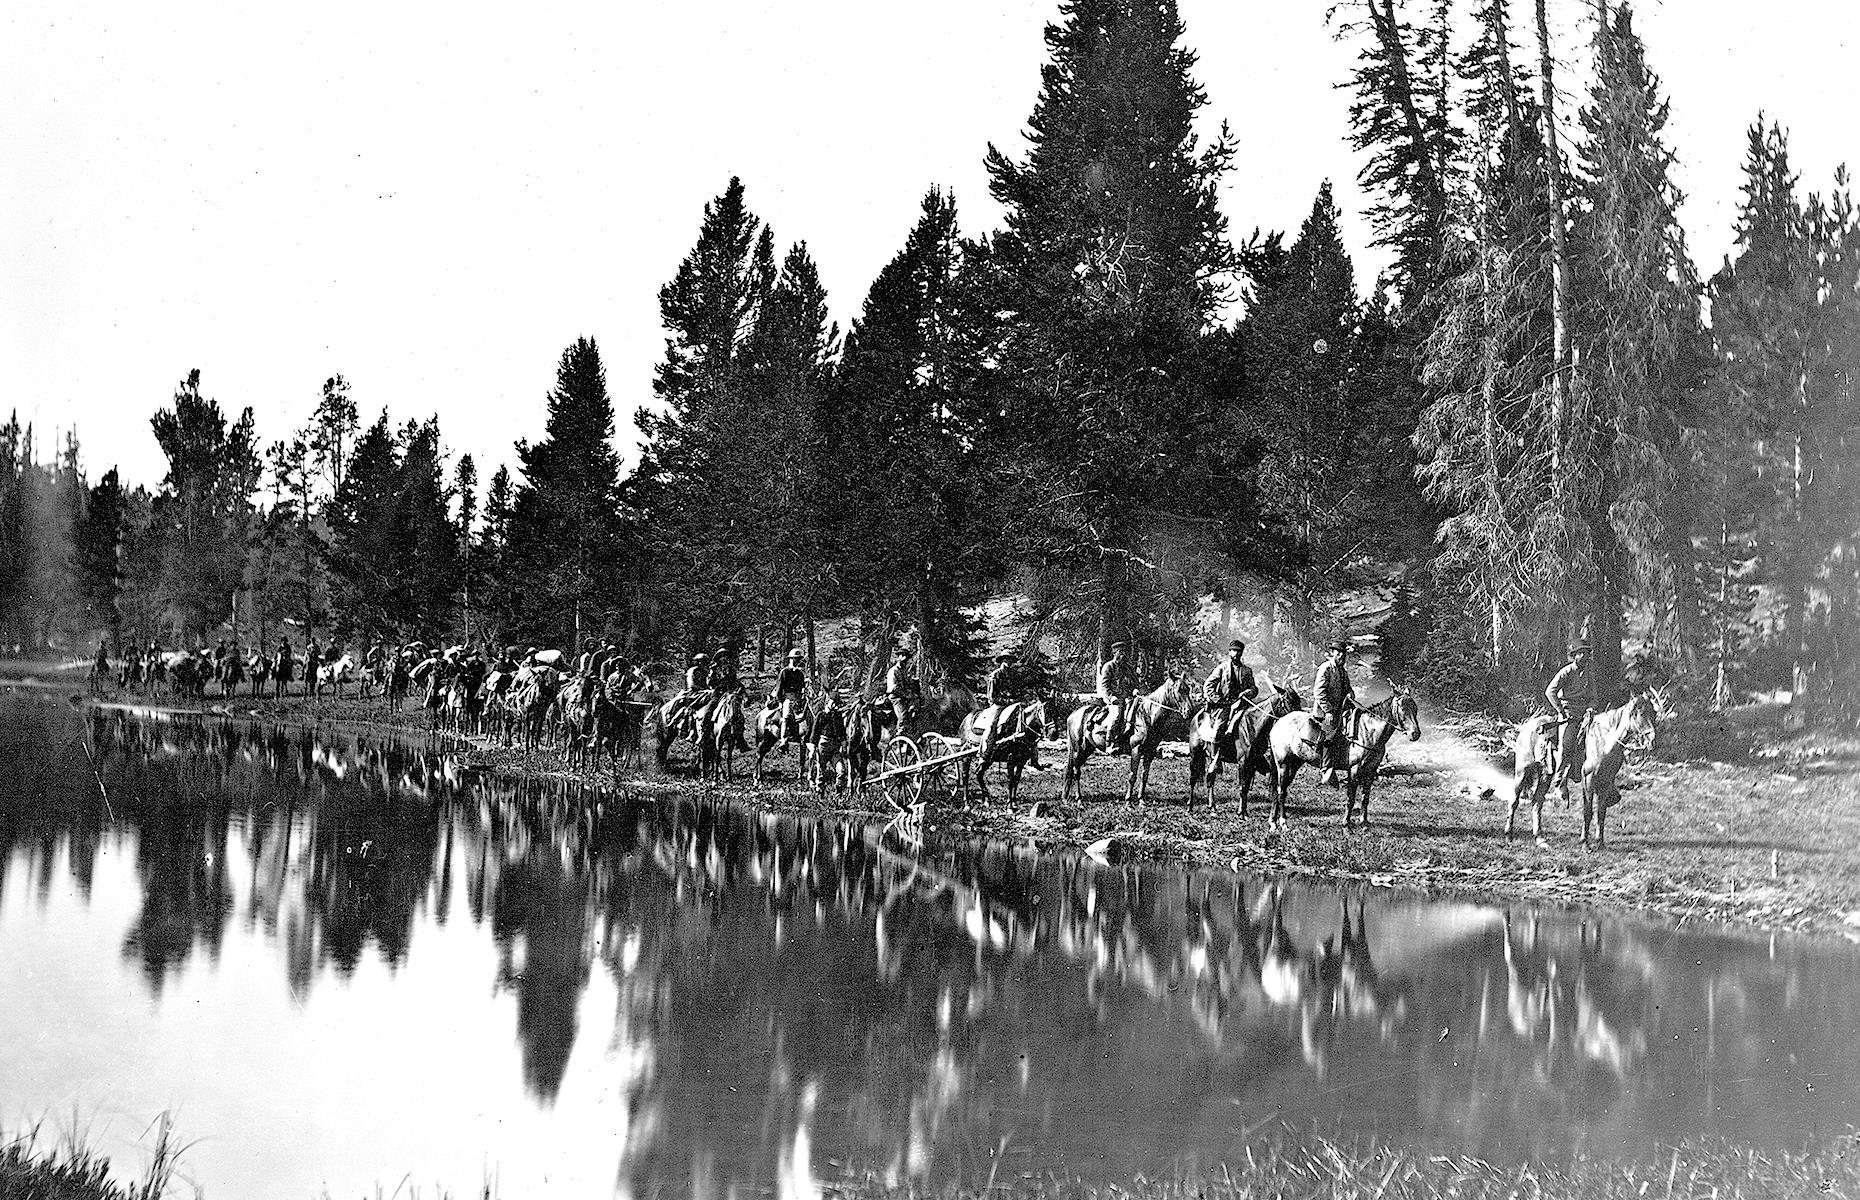 <p>The first National Park in the US, Yellowstone was established in 1872 and covers a large region in northwestern Wyoming as well as Montana and Idaho. This photograph was captured prior to its official founding and shows men carrying out the Hayden Geological Survey of 1871. Tourists began to visit by rail or horse and carriage from the late 1800s, although it wasn’t until cars were allowed in 1915 that tourism really spiked. For thousands of years, Yellowstone has been home to indigenous people and today 26 tribes have ties to the area.</p>